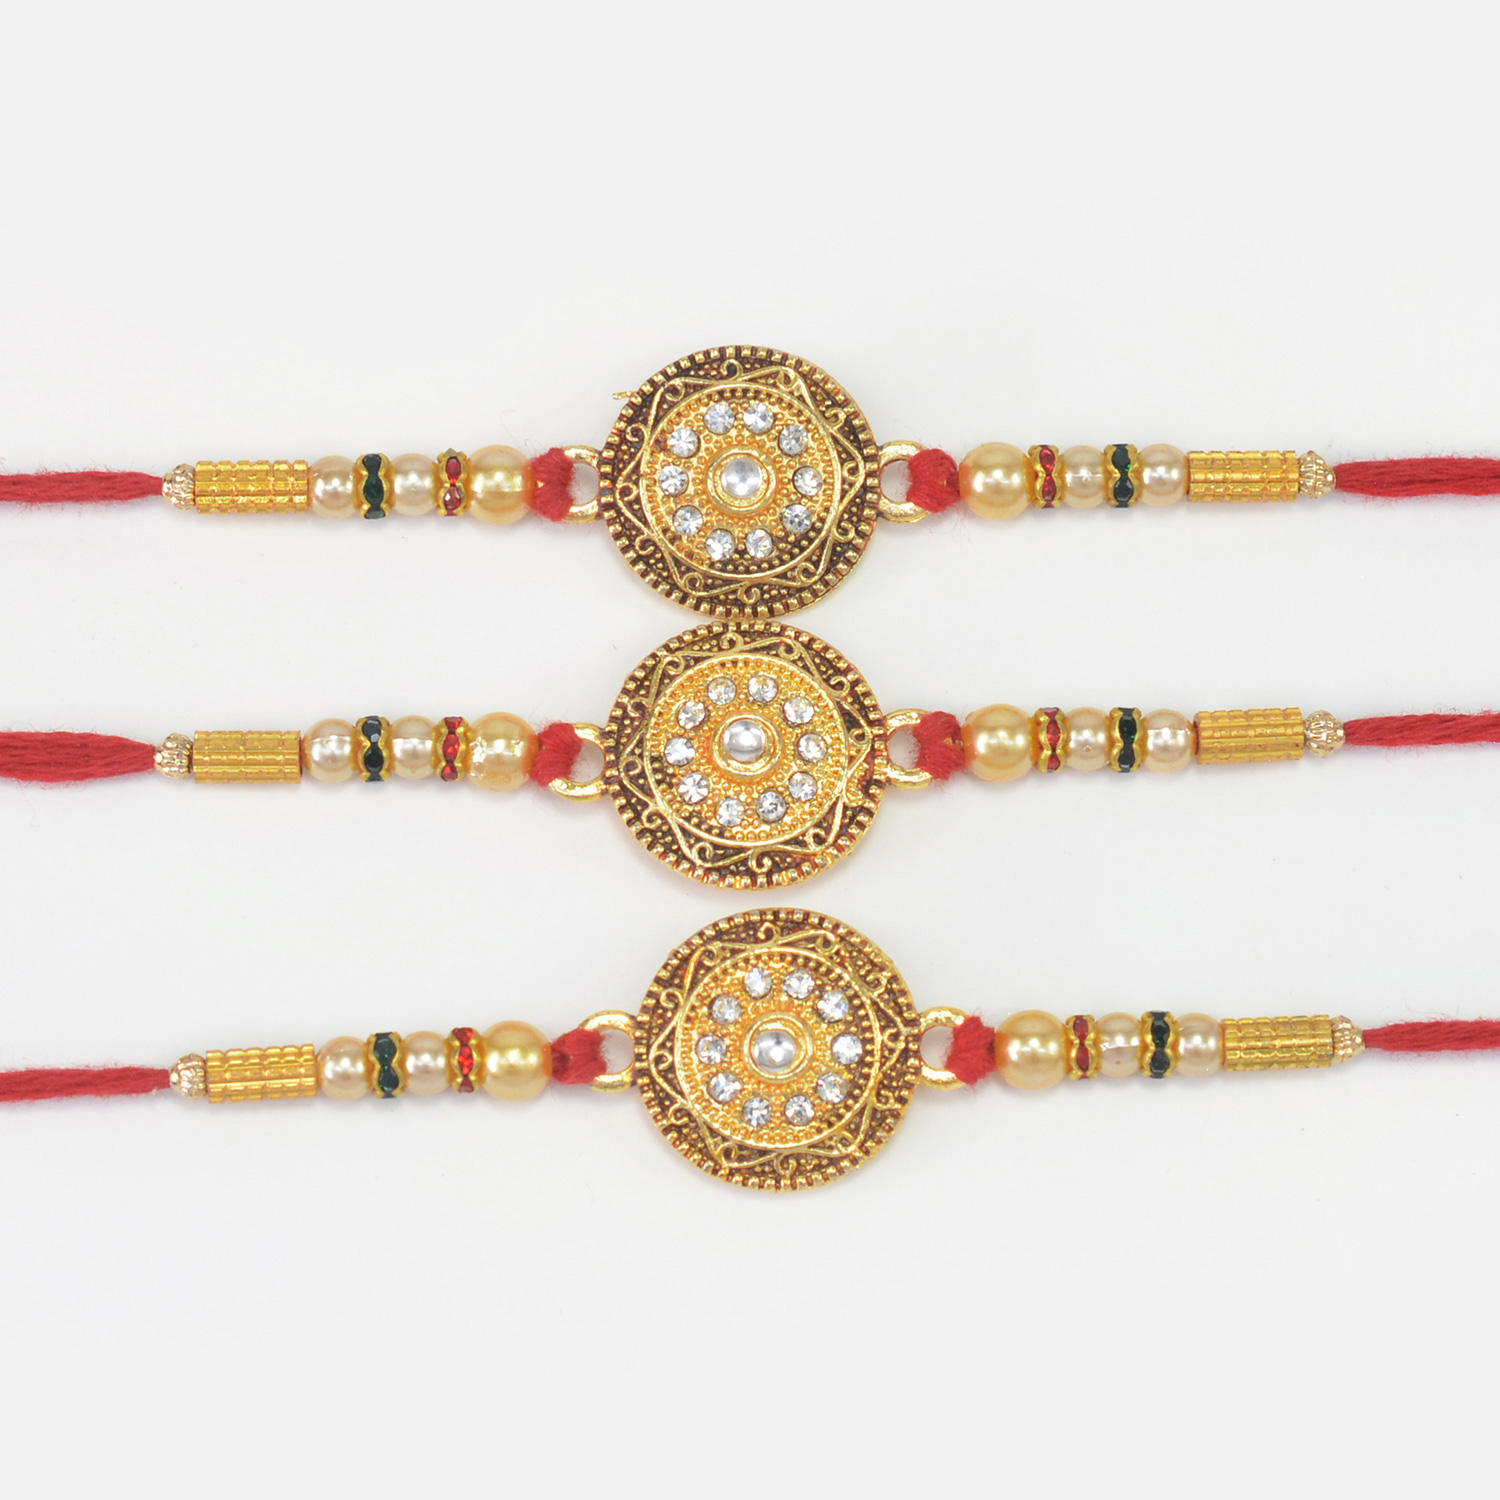 Coin Shape Jewel Studded Designer with Beads Marvelous Looking Rakhis for Brother